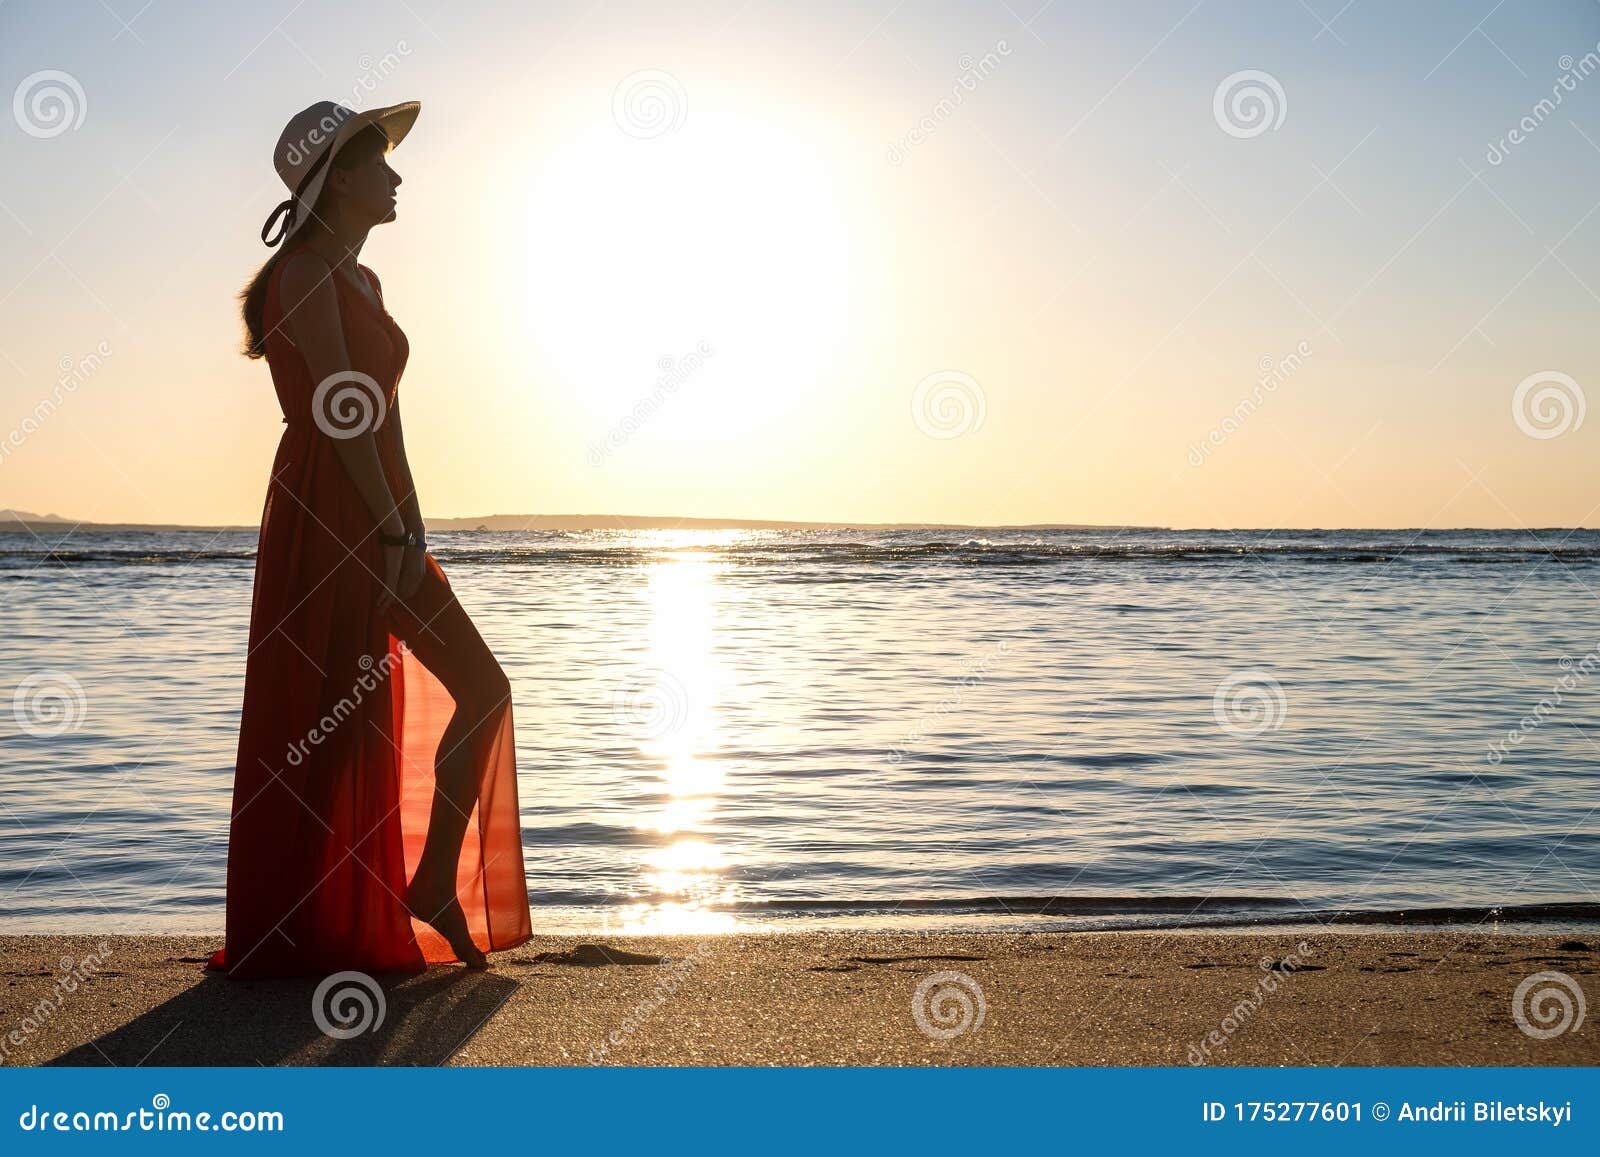 Young Woman Wearing Long Red Dress and Straw Hat Standing on Sand Beach ...